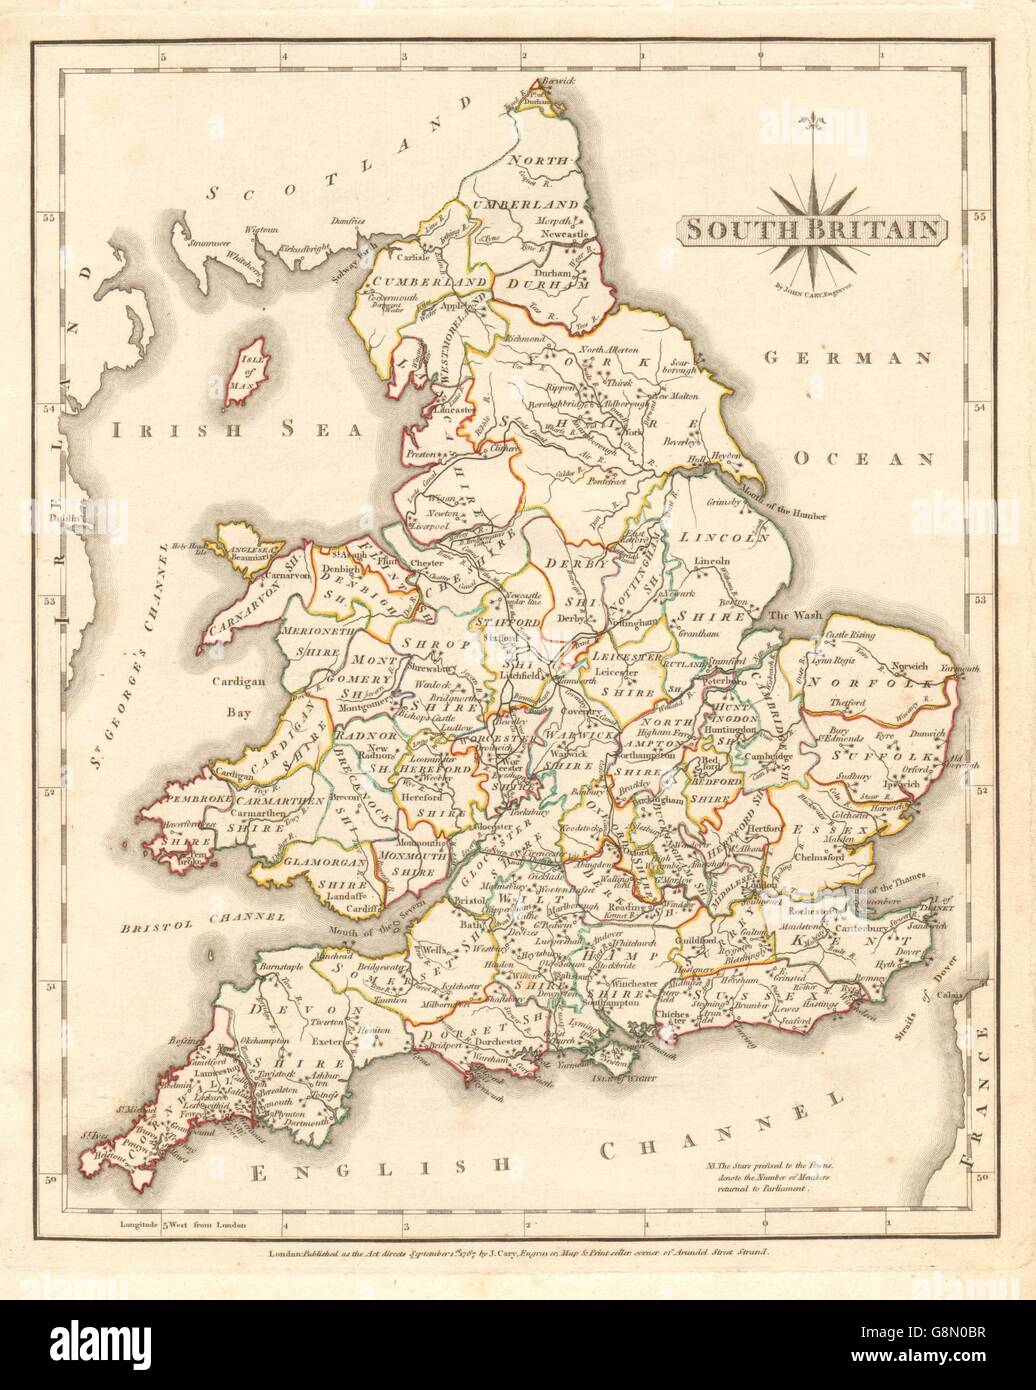 Antique map of SOUTH BRITAIN by JOHN CARY. Original outline colour, 1787 Stock Photo